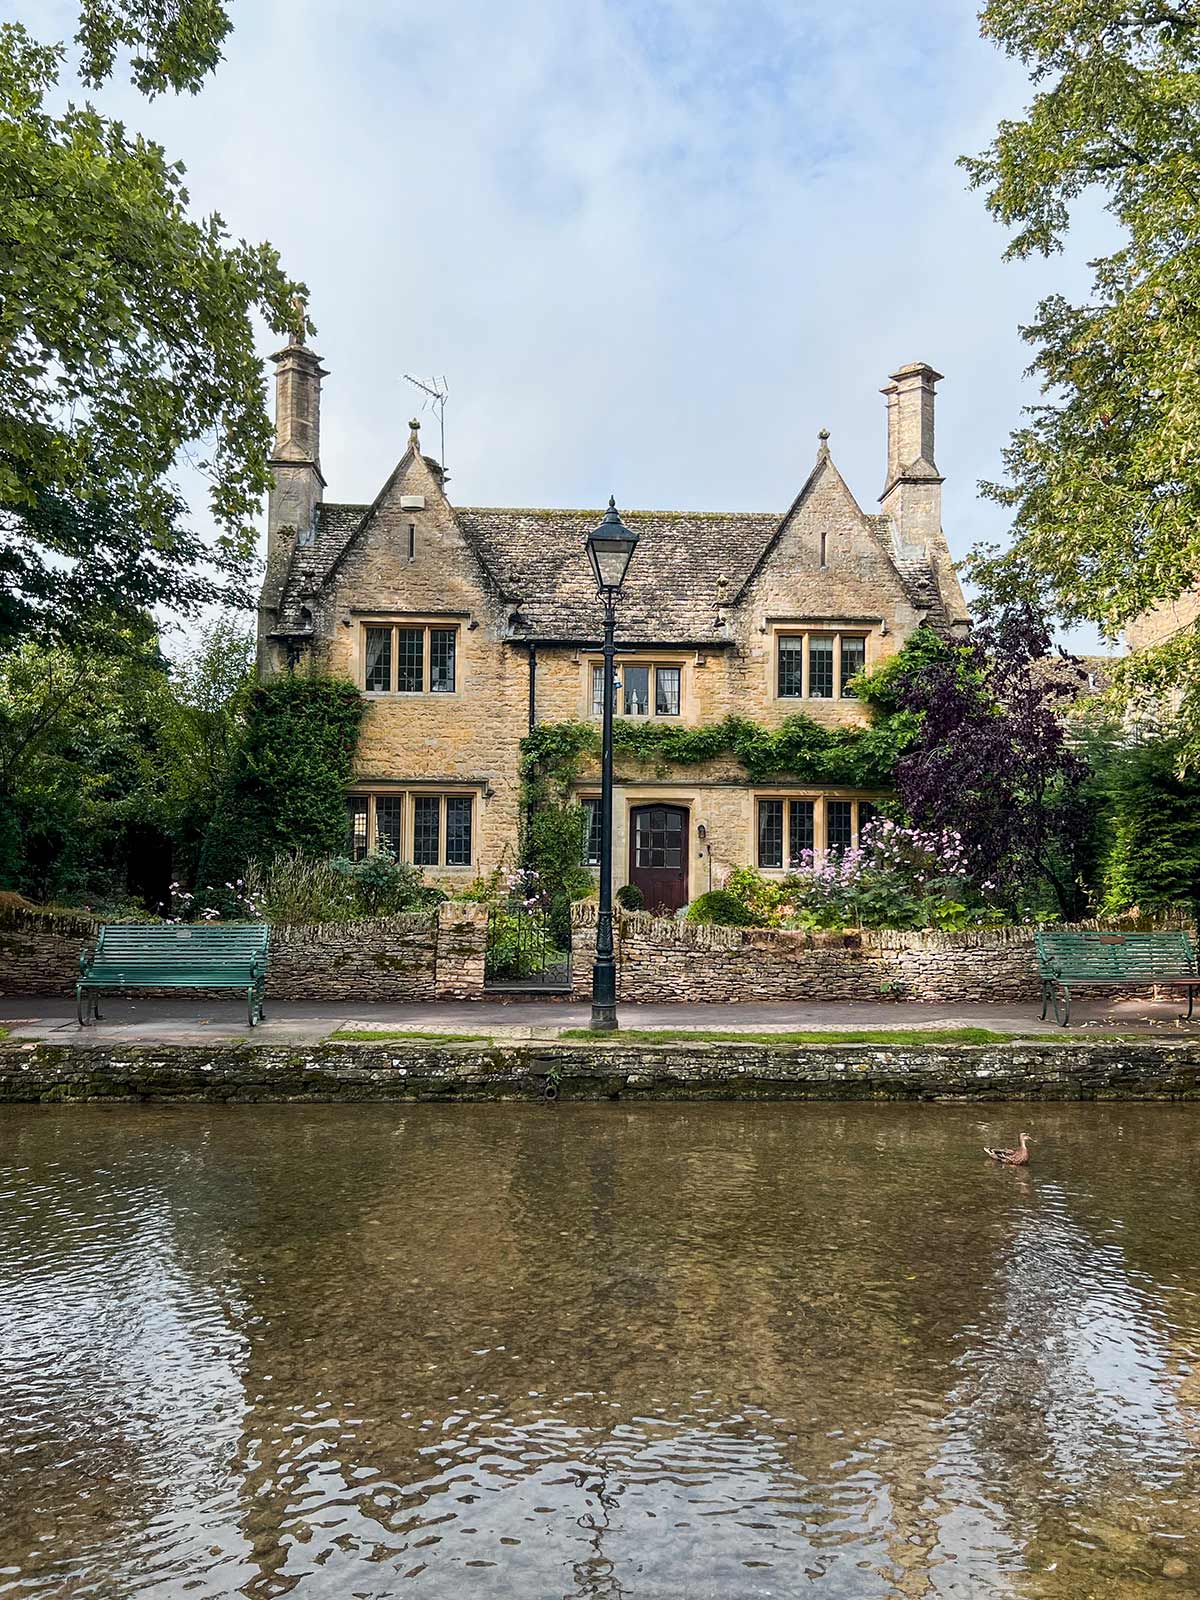 Maison, Village de Bourton-on-the-Water, Cotswolds, Angleterre, Royaume-Uni / House, Bourton-on-the-Water Village, Cotswolds, England, UK